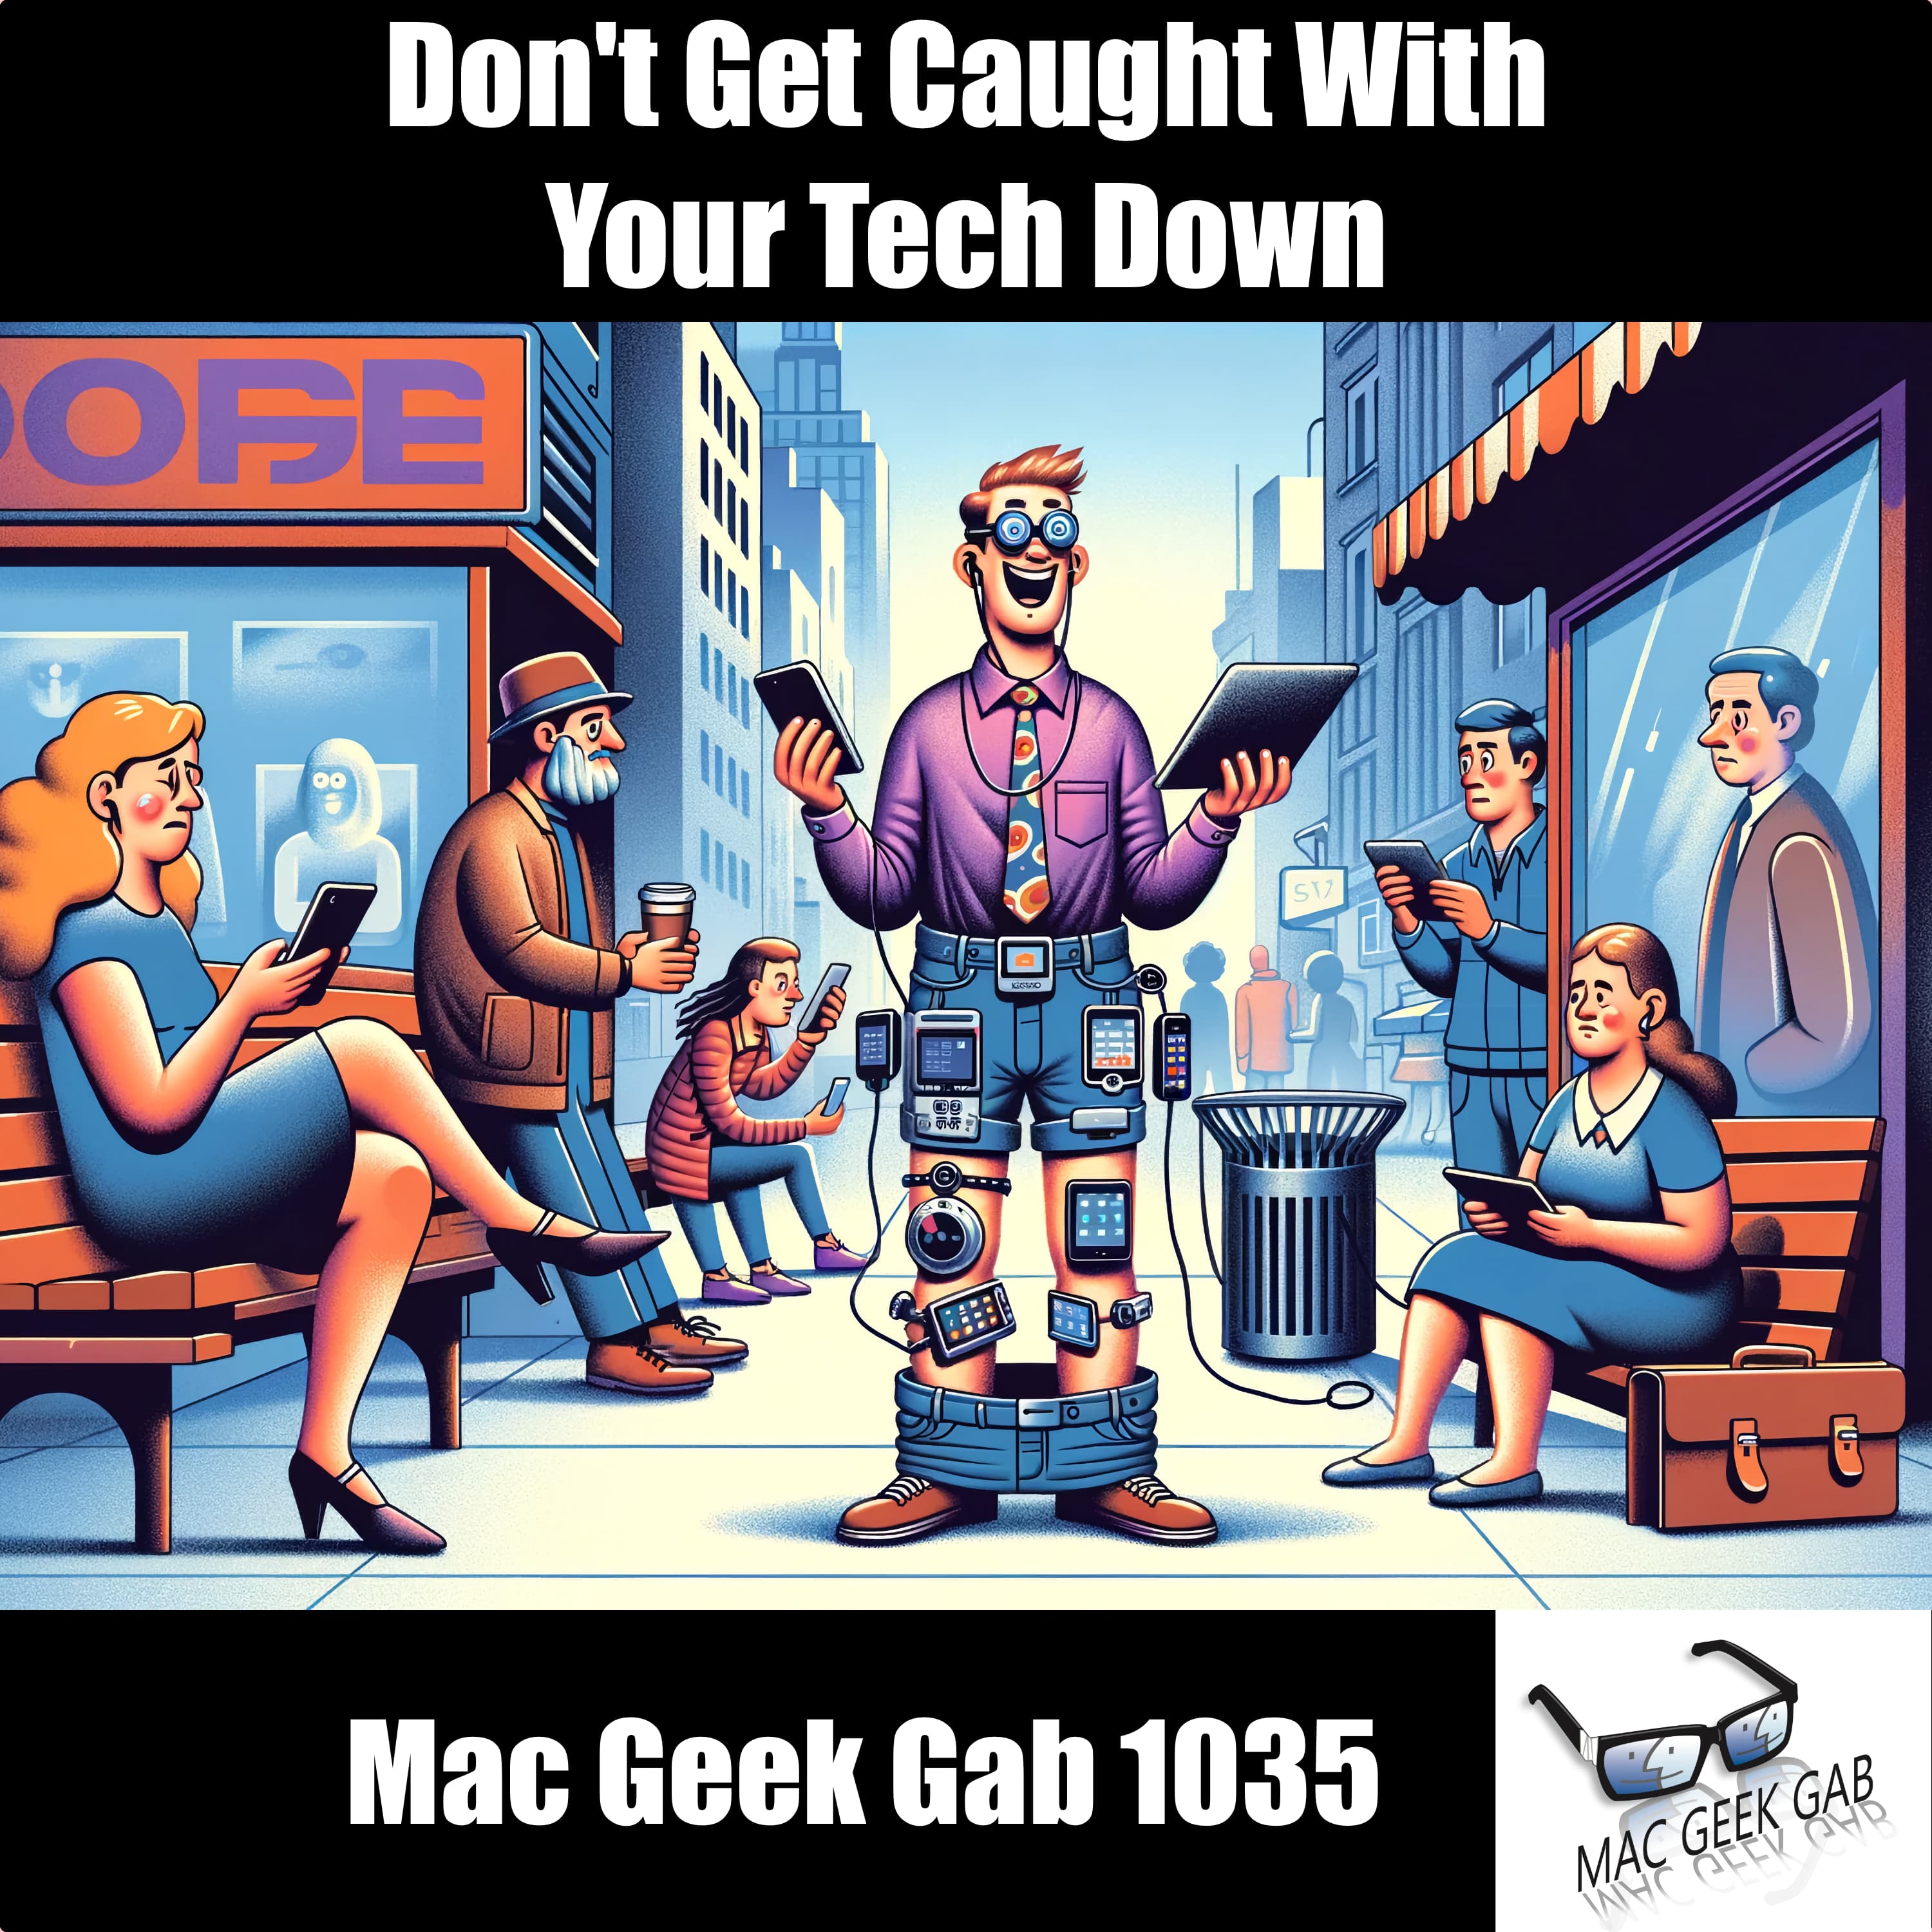 Don’t Get Caught With Your Tech Down — Mac Geek Gab 1035 episode image